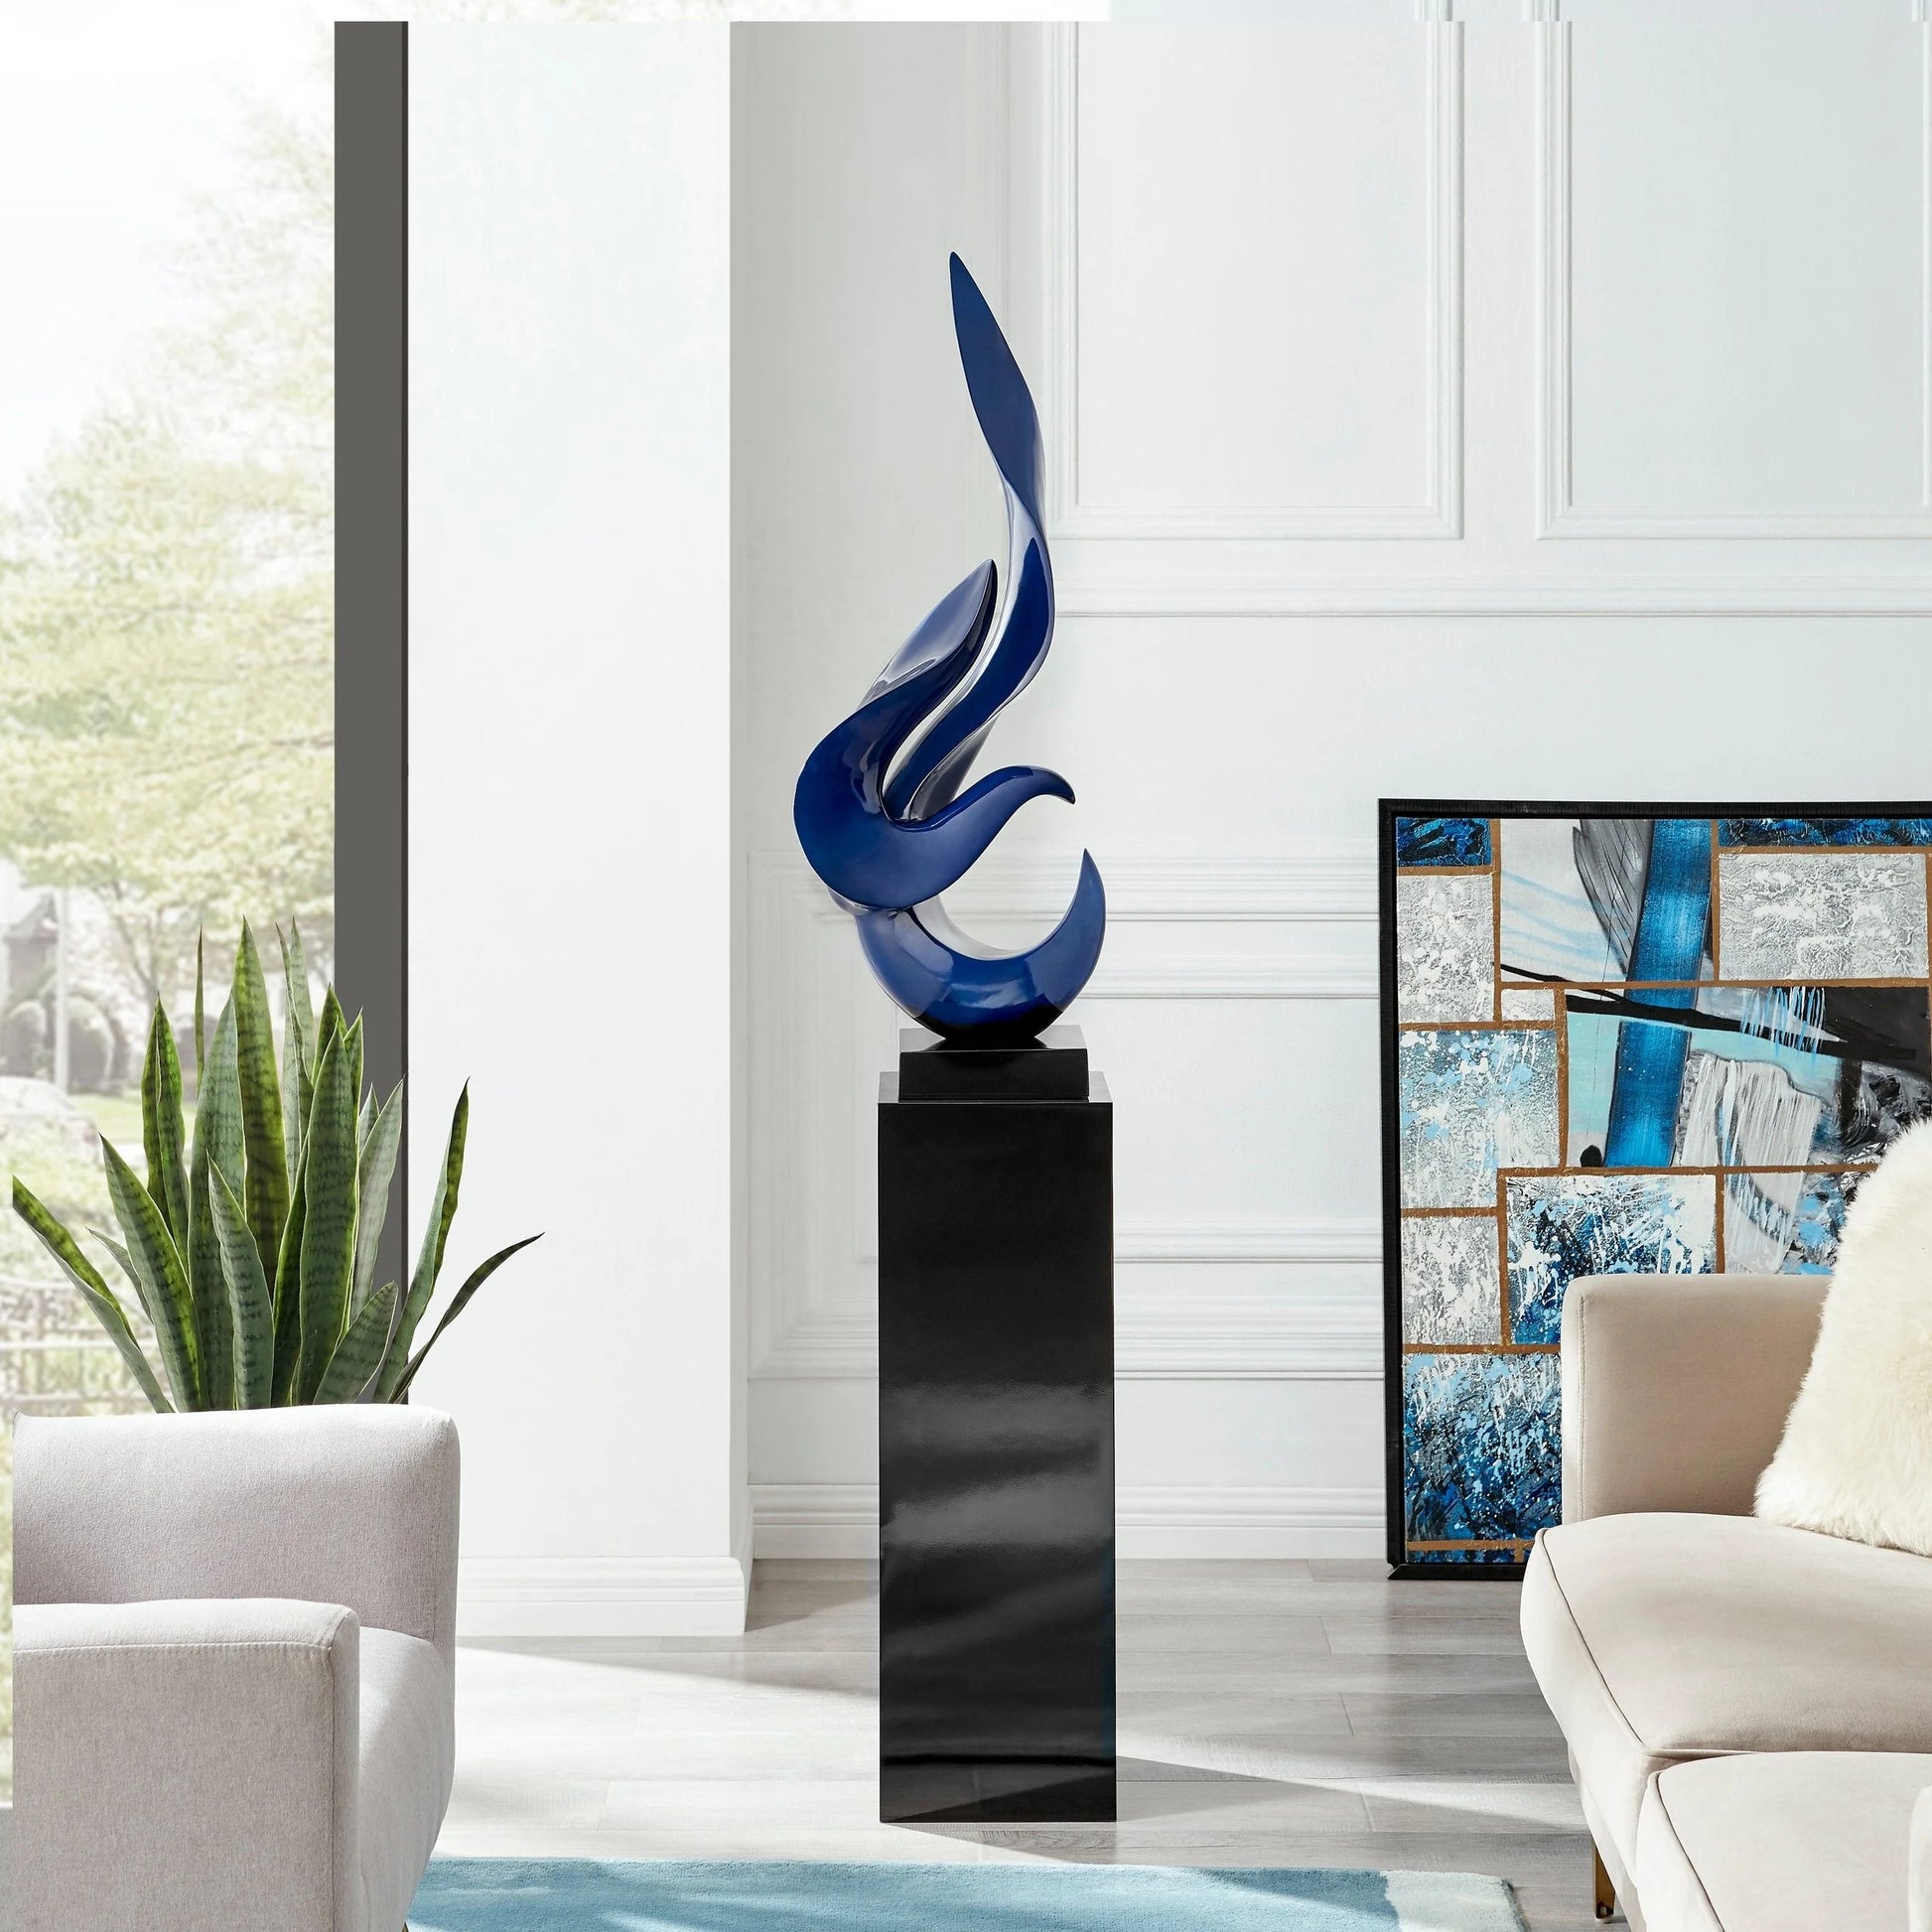 Finesse Decor Navy Blue Flame Floor Sculpture With Black Stand 2